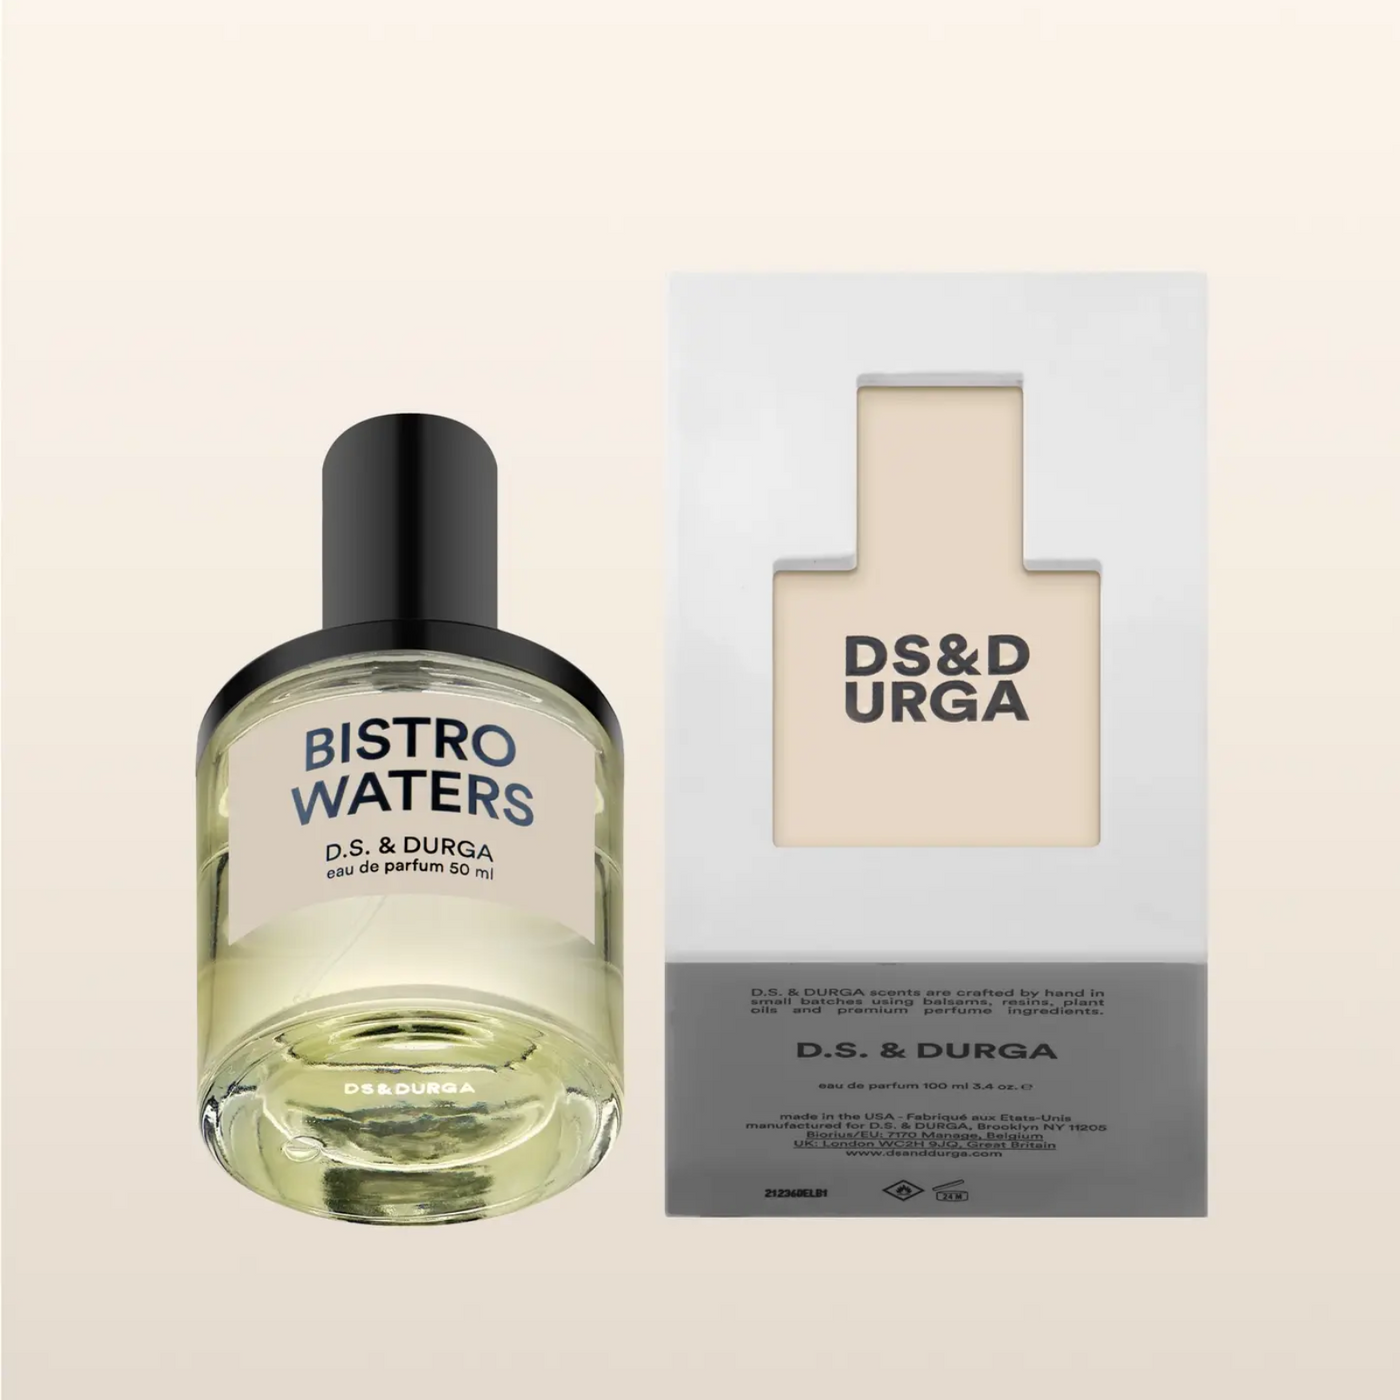 Bistro Waters Perfume by D.S. & Durga